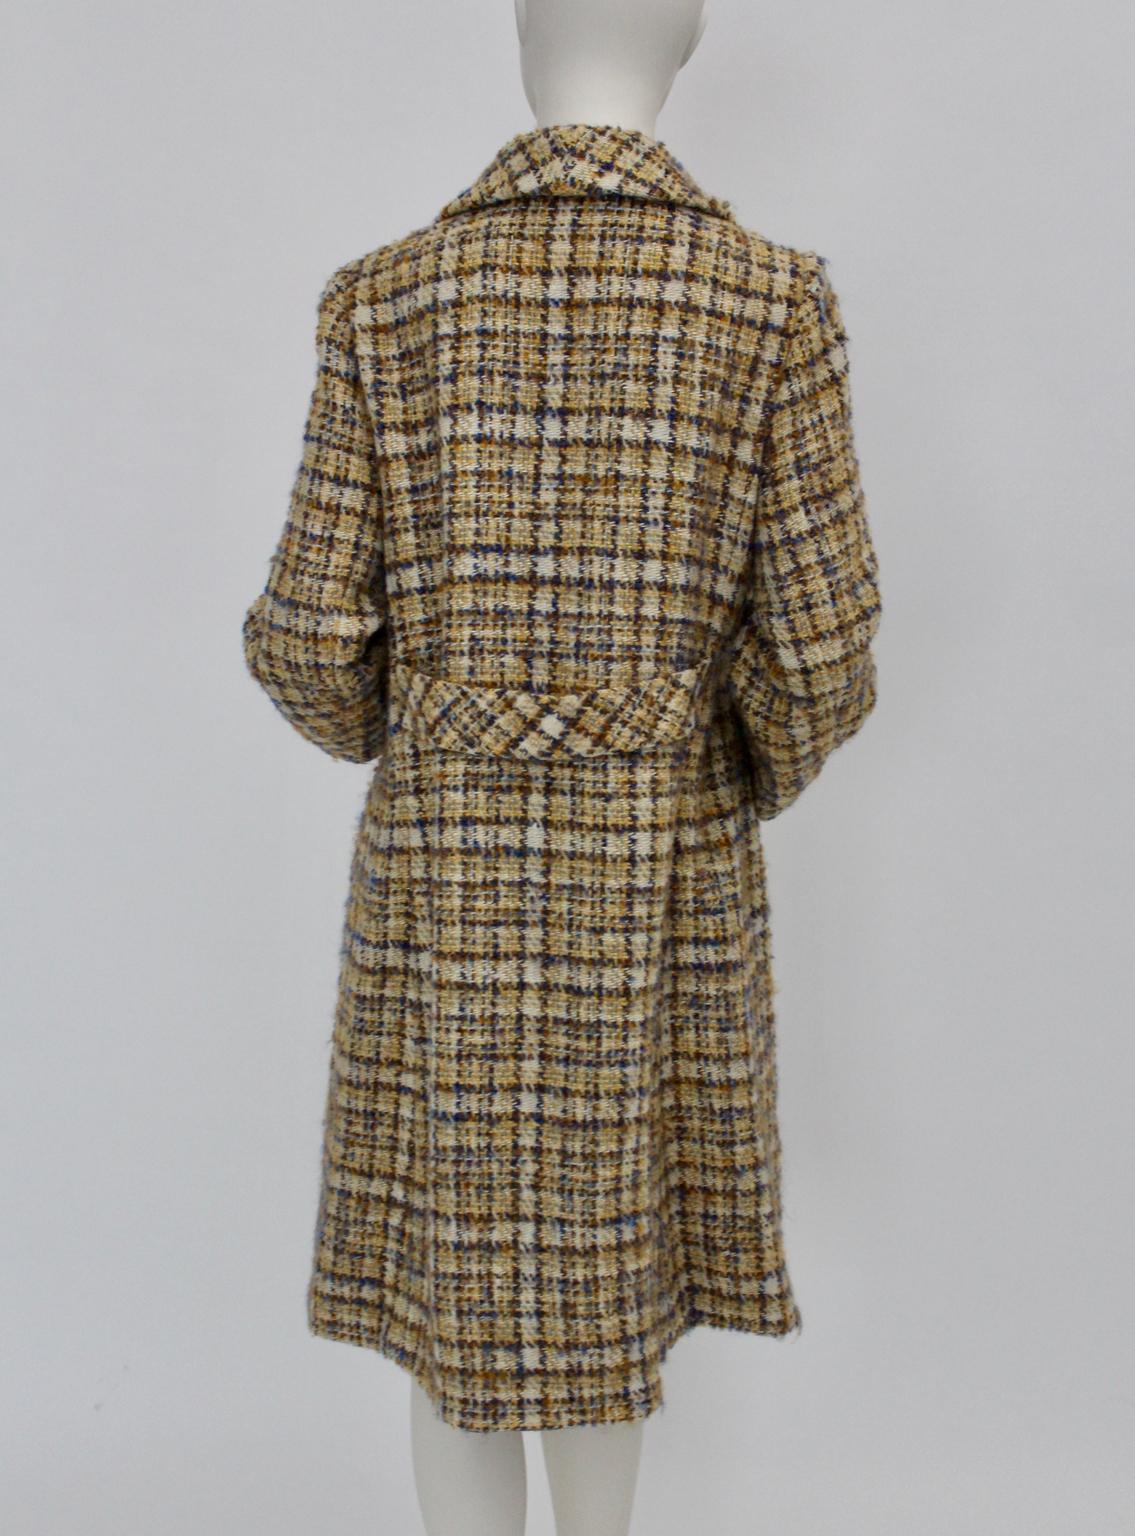 Herbert Schill Wool Tweed Boucle Double Breasted Coat circa 1968 Vienna For Sale 1